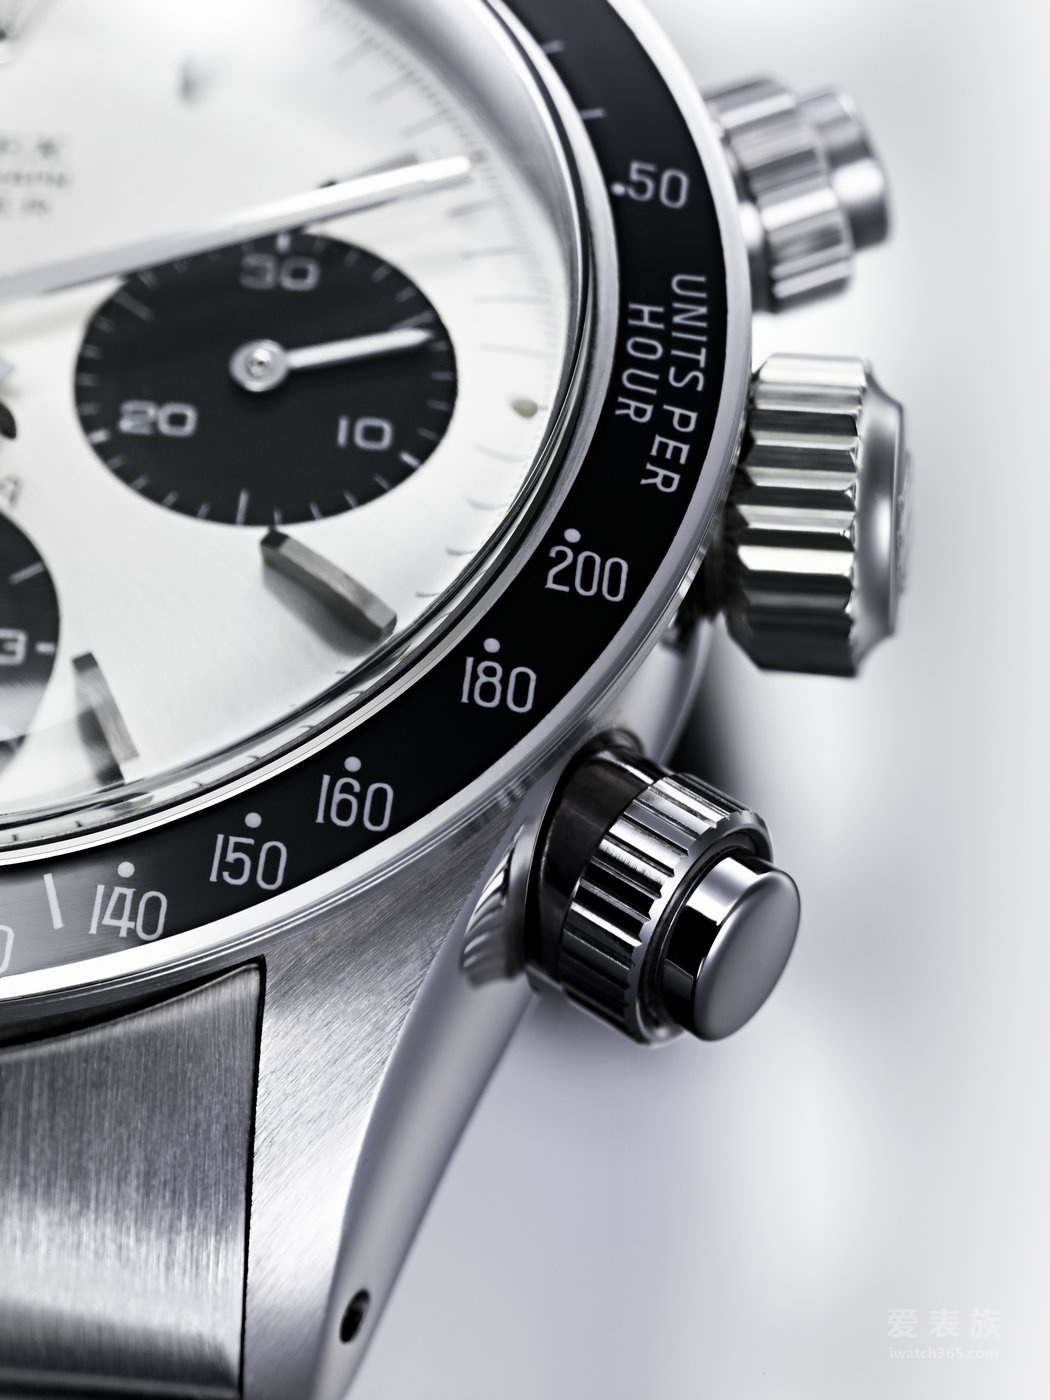 Rolex Oyster Perpetual Cosmograph Di Tong take birth rate chronograph